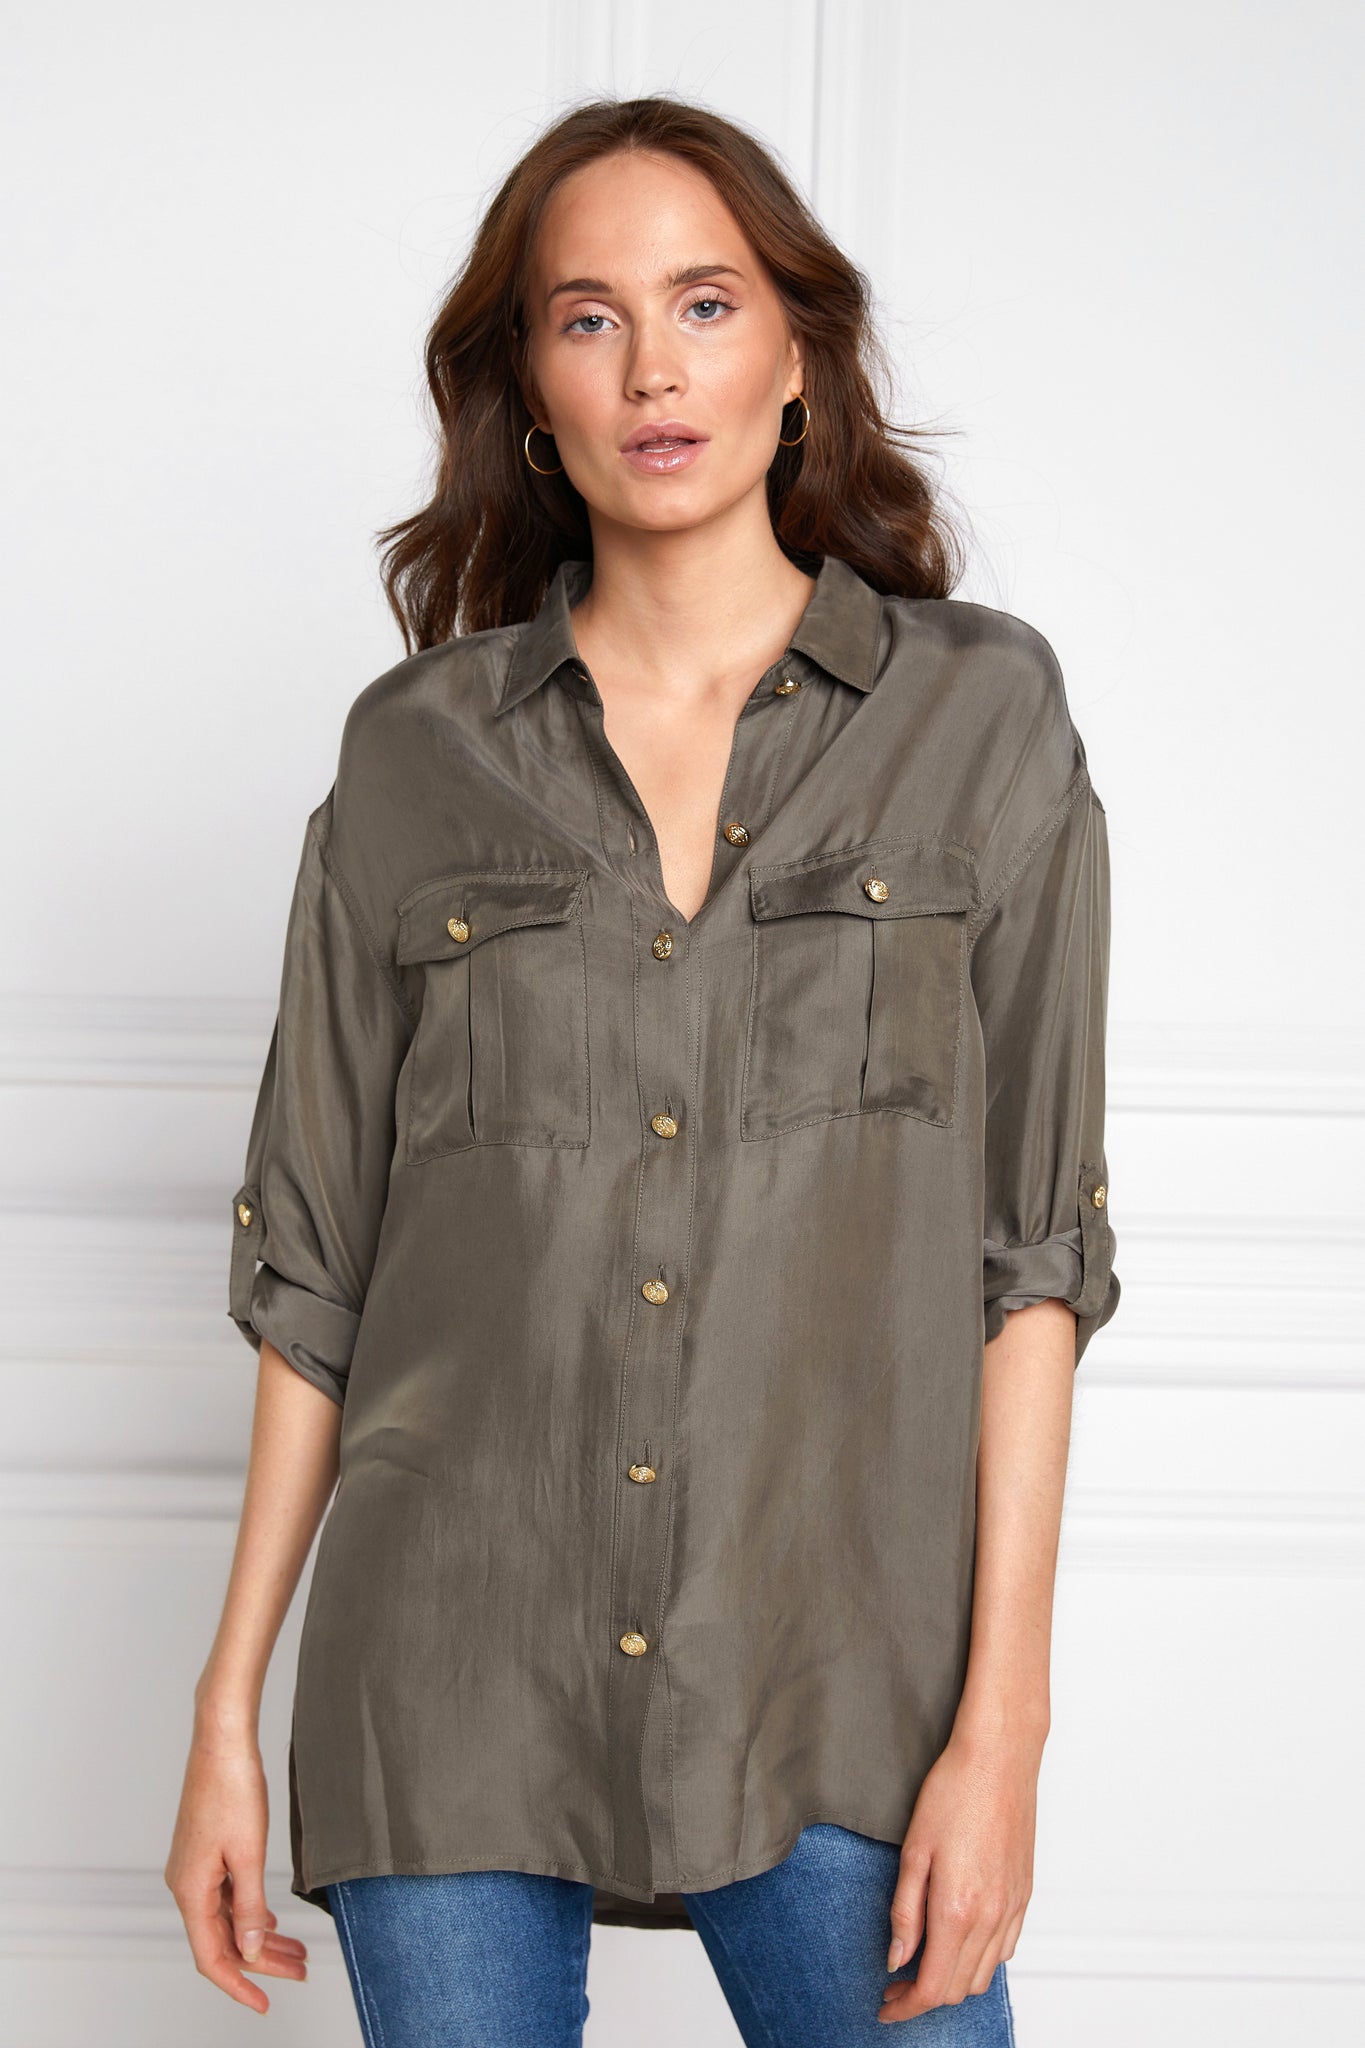 Relaxed Fit Military Shirt (Misty Khaki)